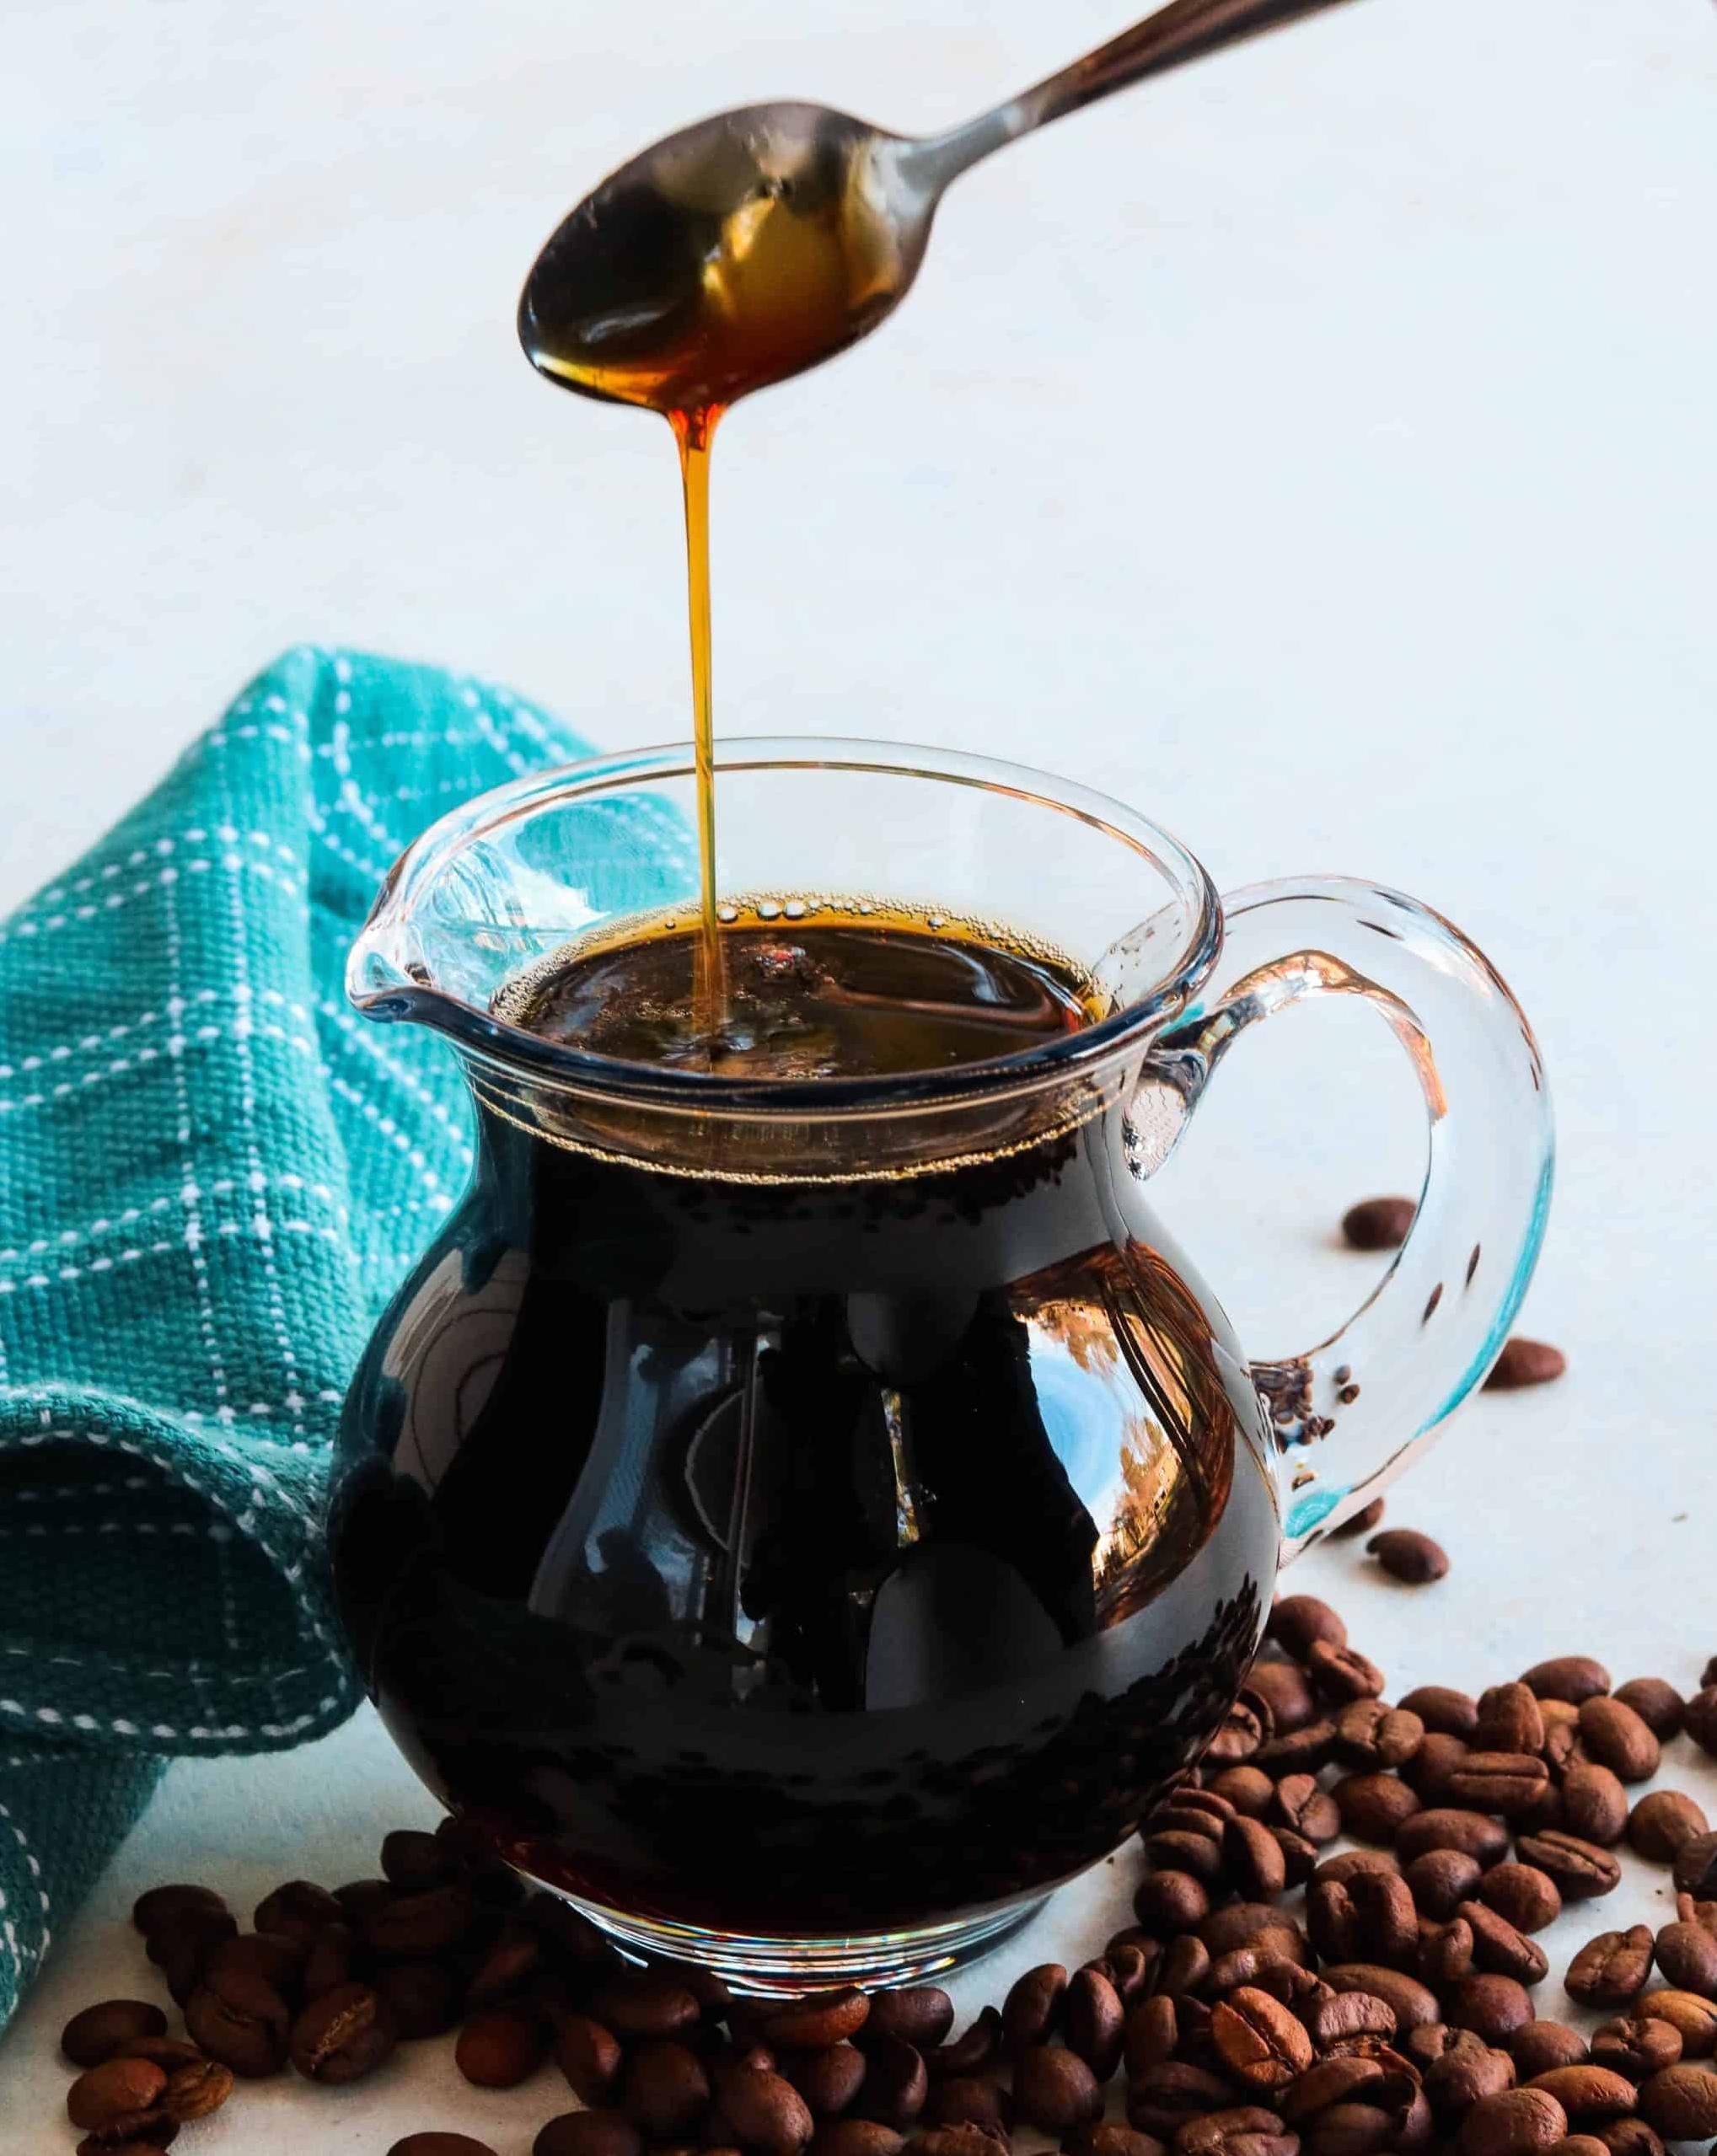  Get inspired to create your own unique coffee flavors.